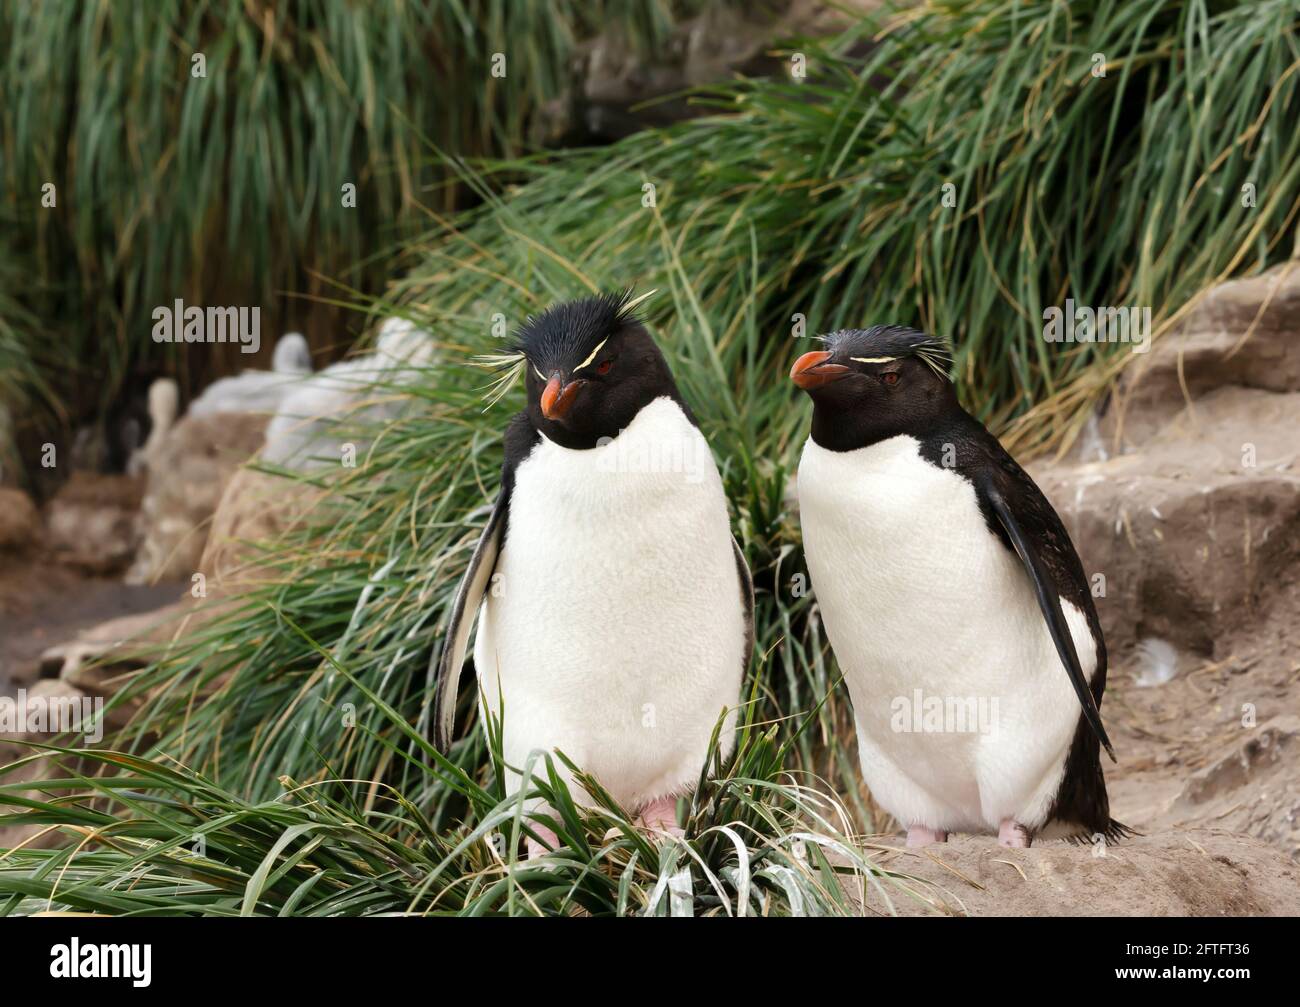 Two Rockhopper penguins standing in tussac grass on a coastal area of the Falkland Islands. Stock Photo